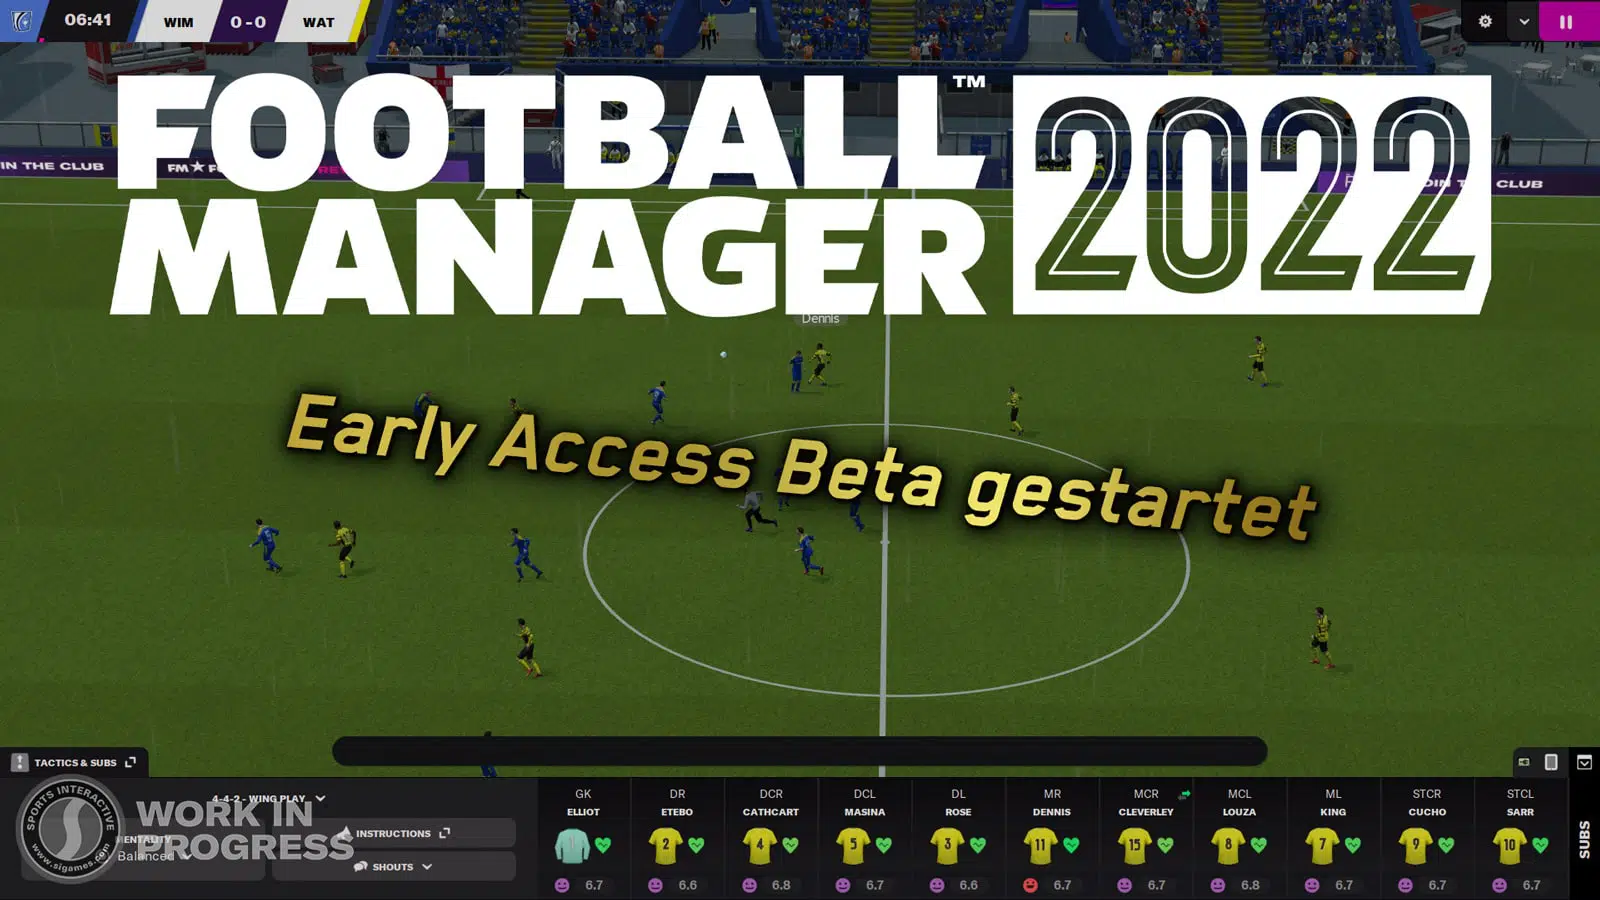 FM22 early access beta